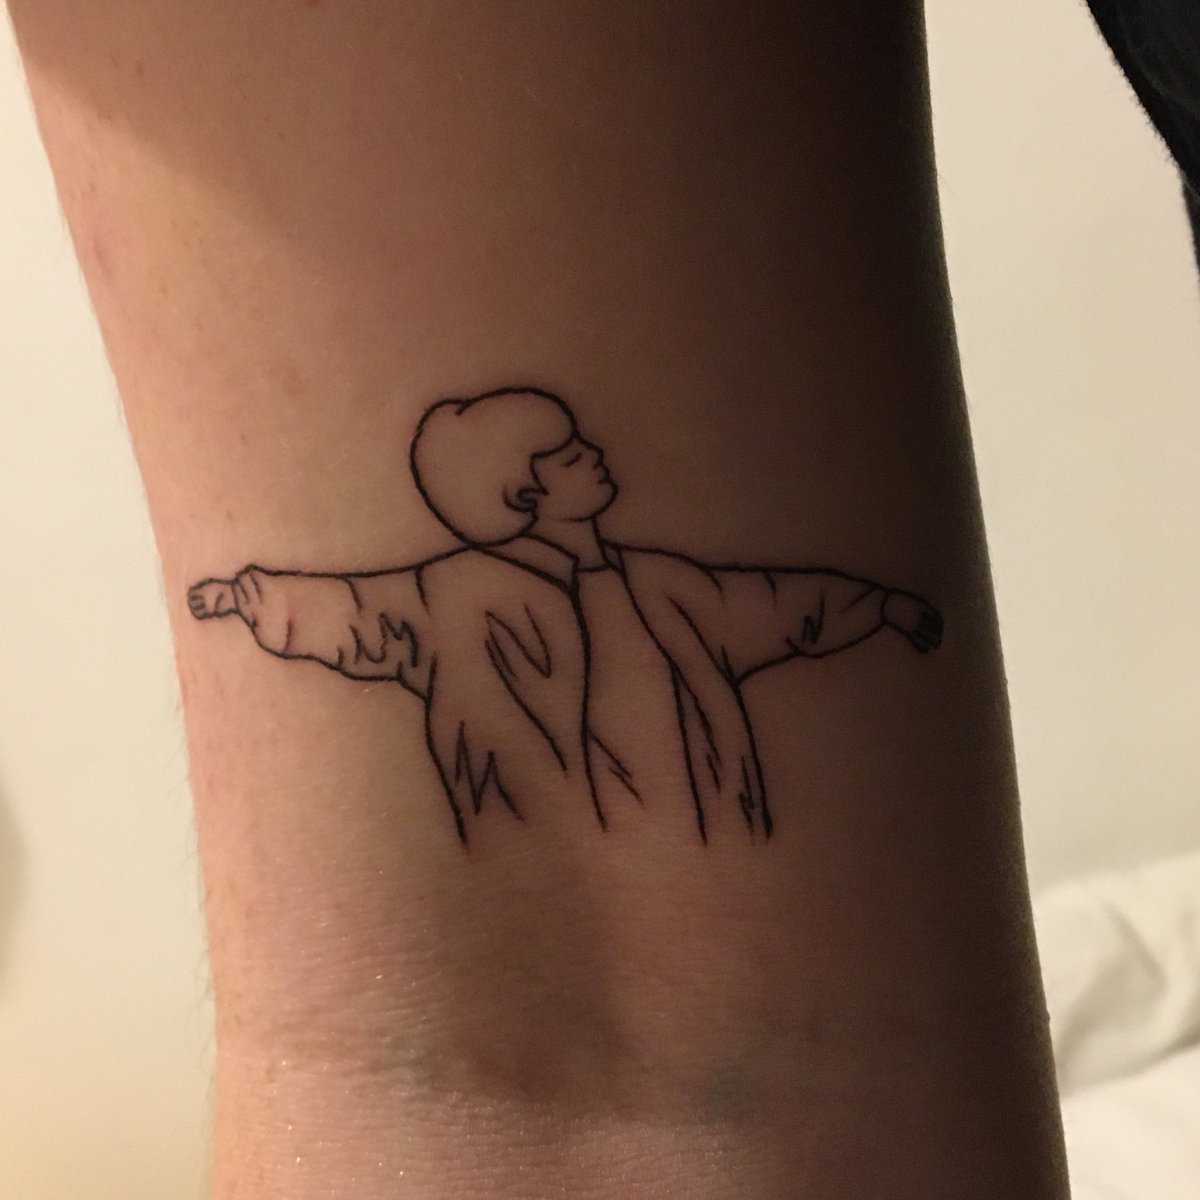 ❃.✮:▹ 60/365my little euphoria i love you so much thankyou for everything<3 this song means a lot to me and the video is so beautiful, i’m over the moon to be able to carry a reminder around with me forever